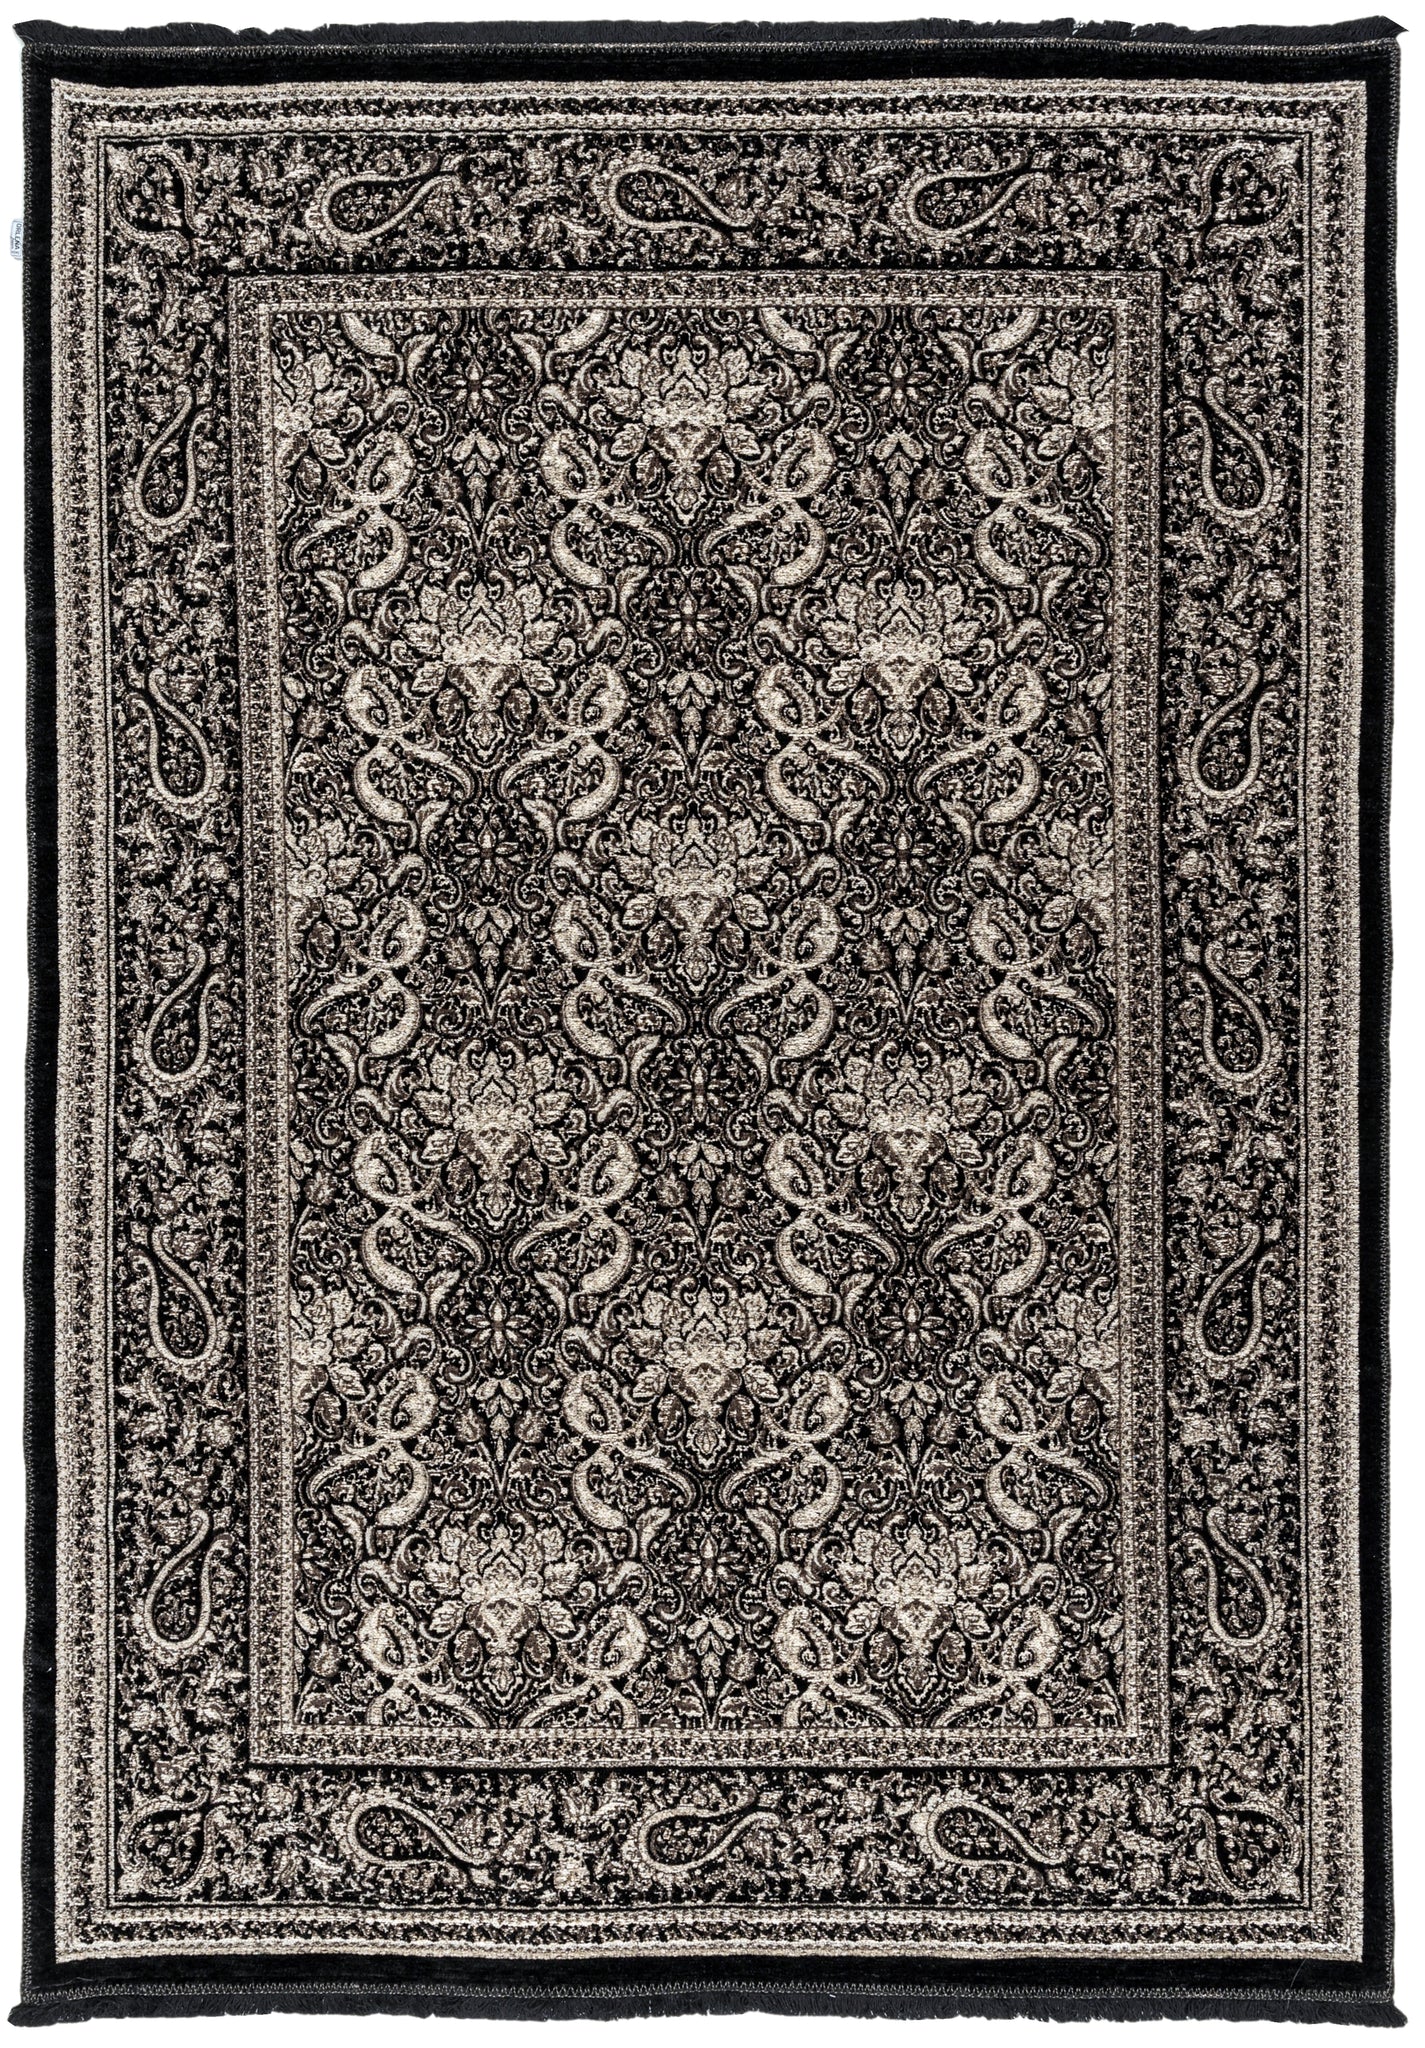 Washable Area rug | Simon & Yildirim Ease of Elegance Trek | Beige and Black Abstract | 8x10 | By MotherRuggers.com | Machine Washable | Jacquard Woven | Pet Friendly | Kid Friendly | Machine Wash | Line Dry | Living Room | Covered Patio | Entry Way | Bedroom | High-Traffic | Two-year warranty with proper care | Shake or light Vacuum | Machine Wash as needed | Dry Flat or Line Dry | Dries fast